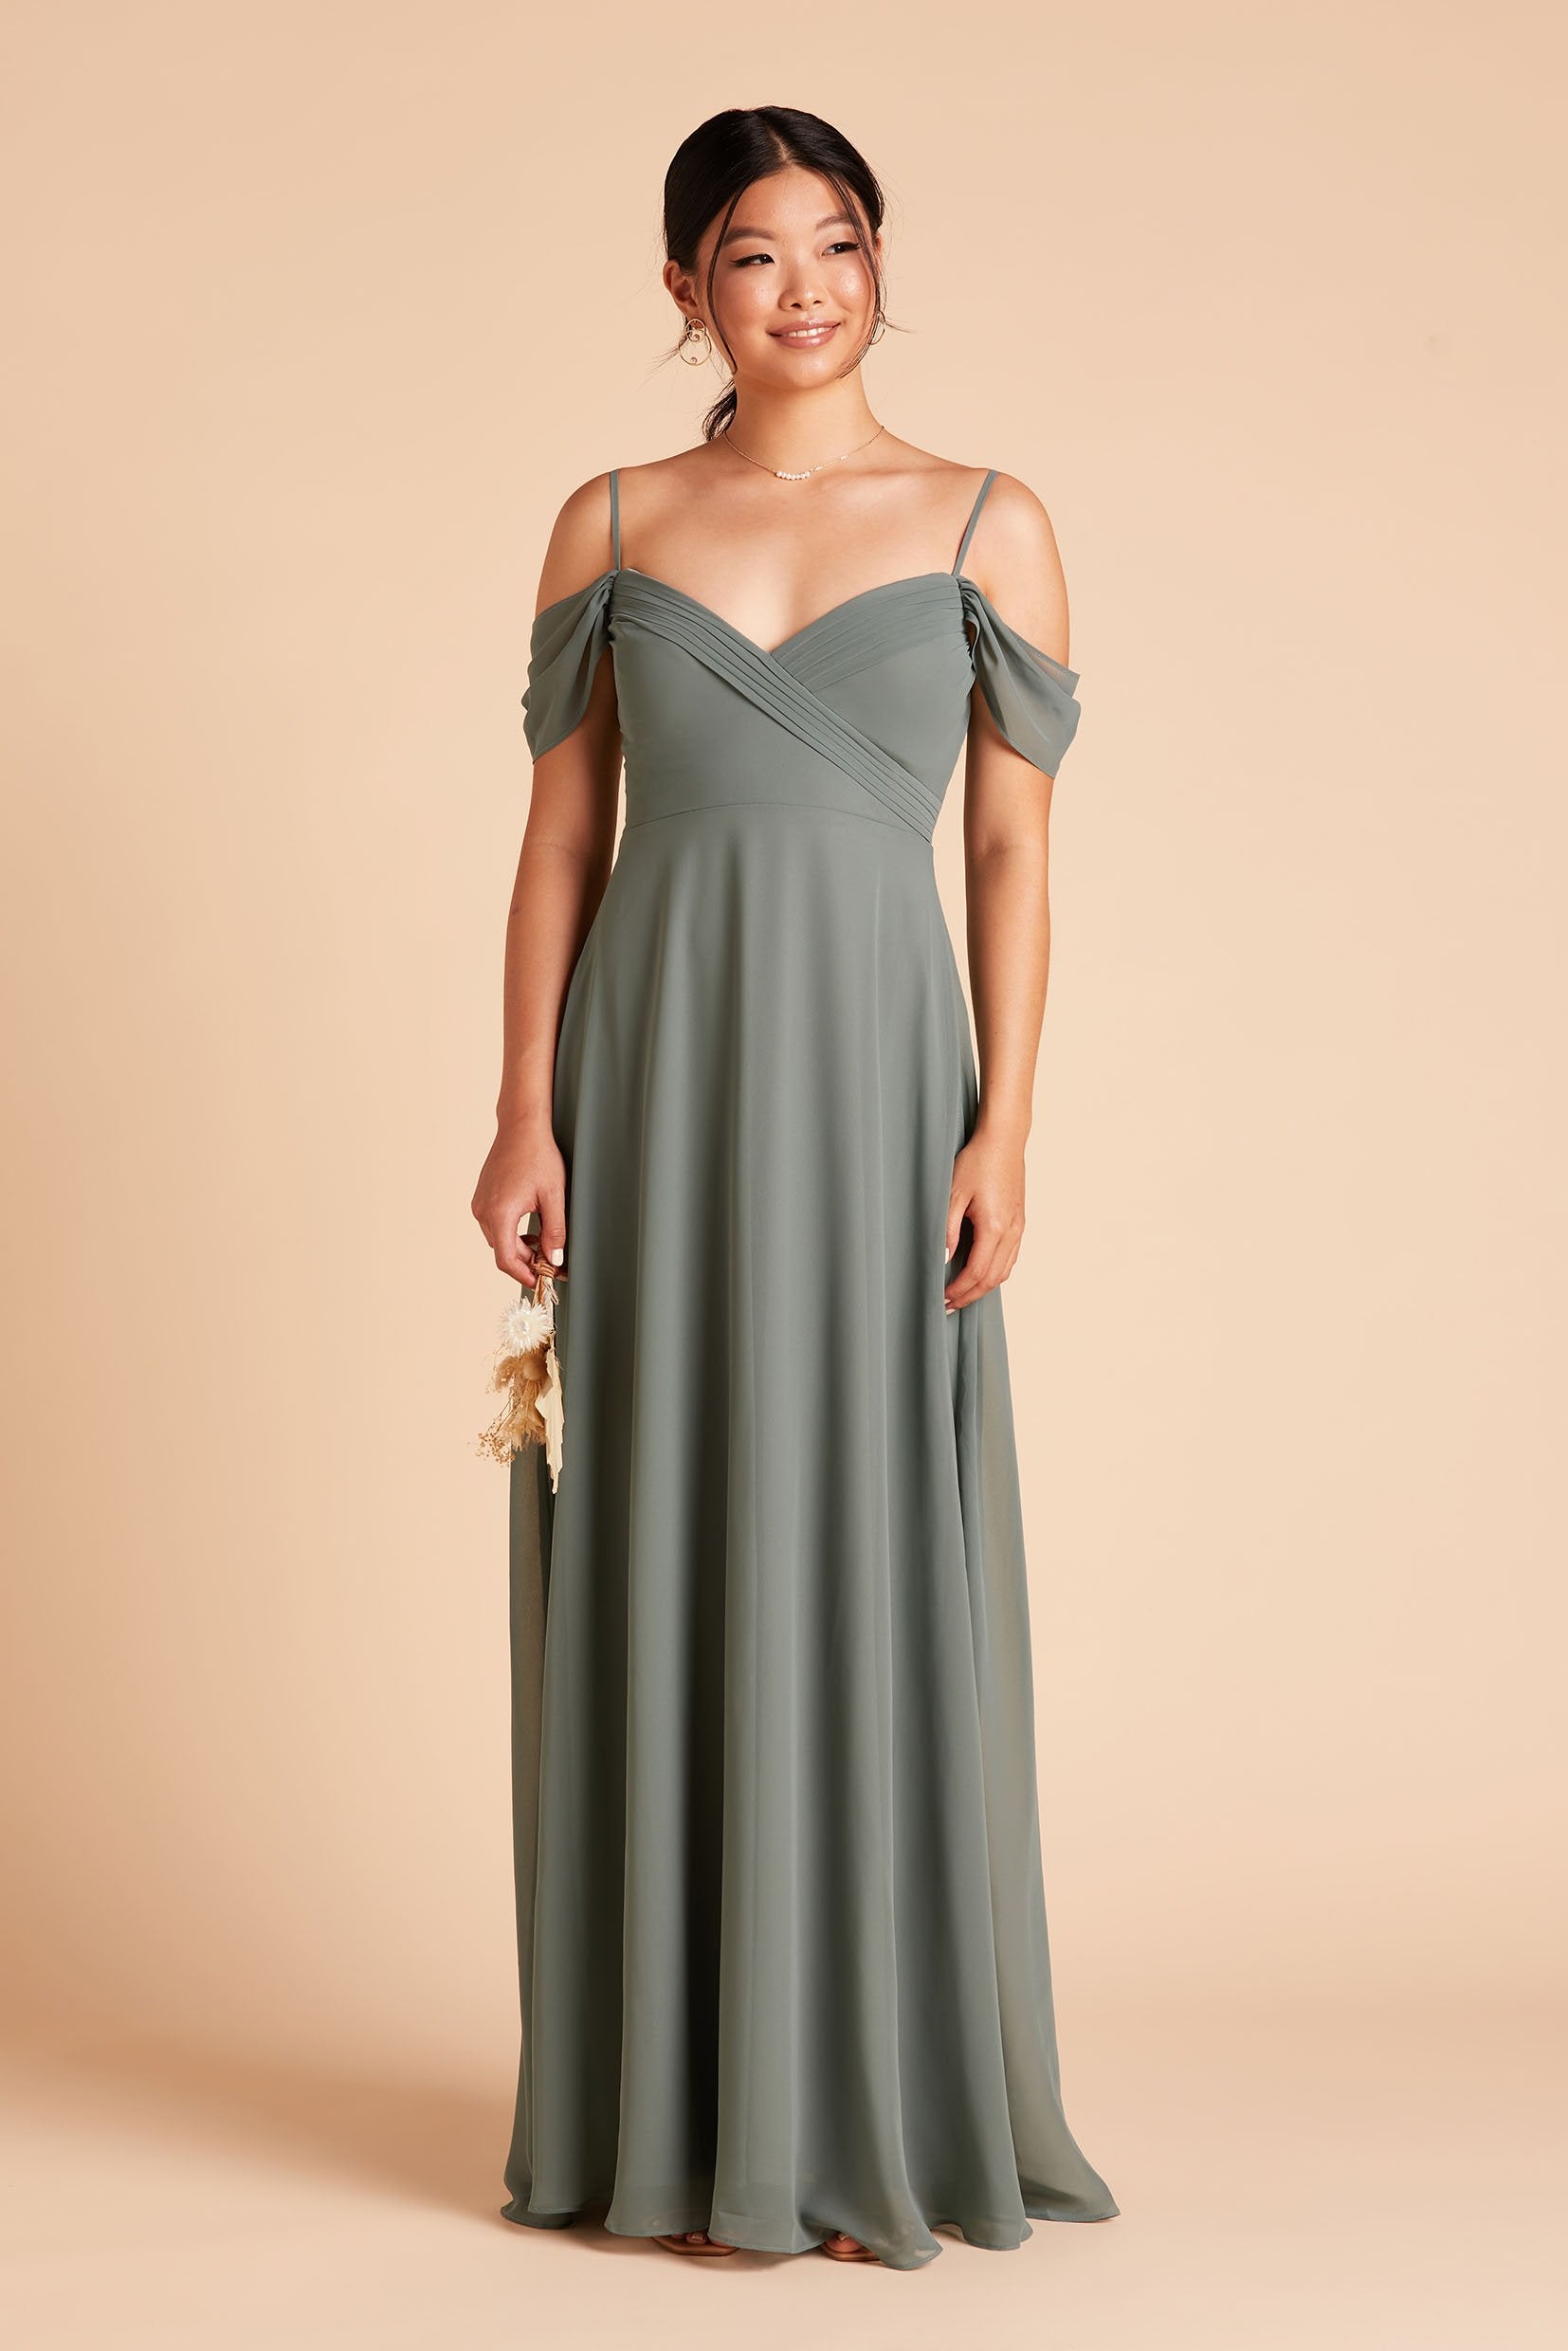 Spence convertible bridesmaid dress in sea glass green chiffon by Birdy Grey, front view